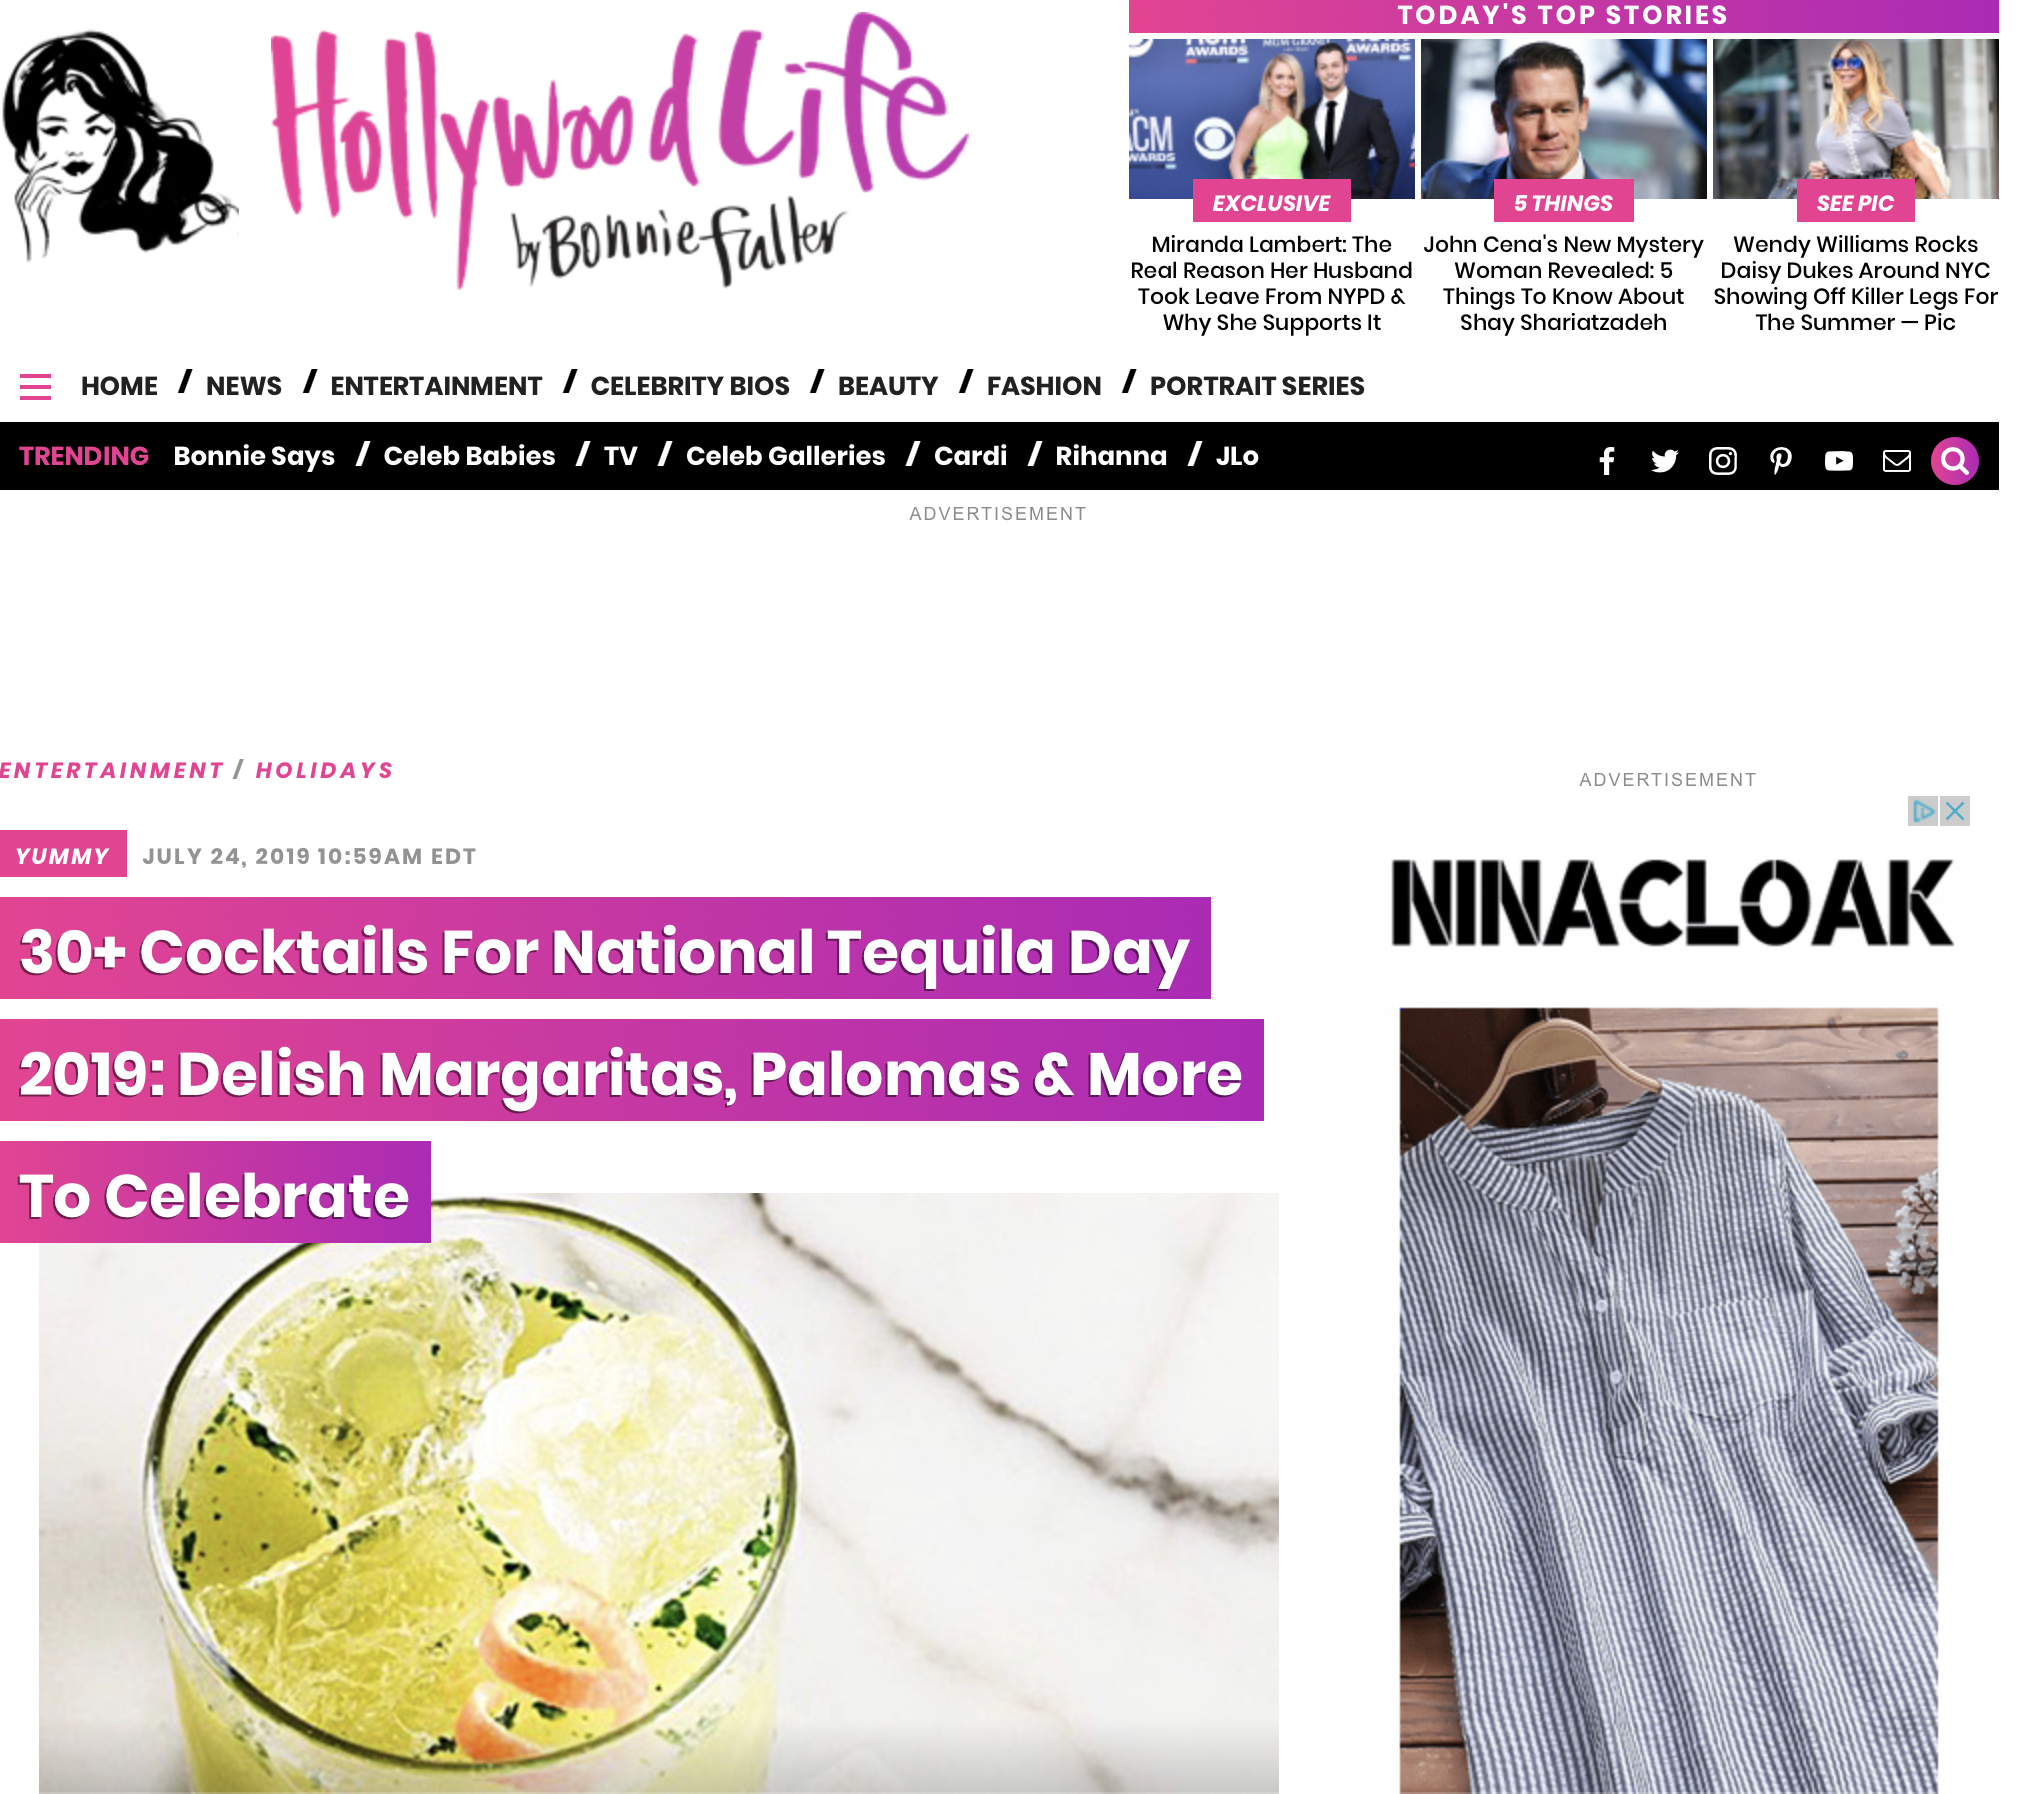 Hollywood life features nosotros